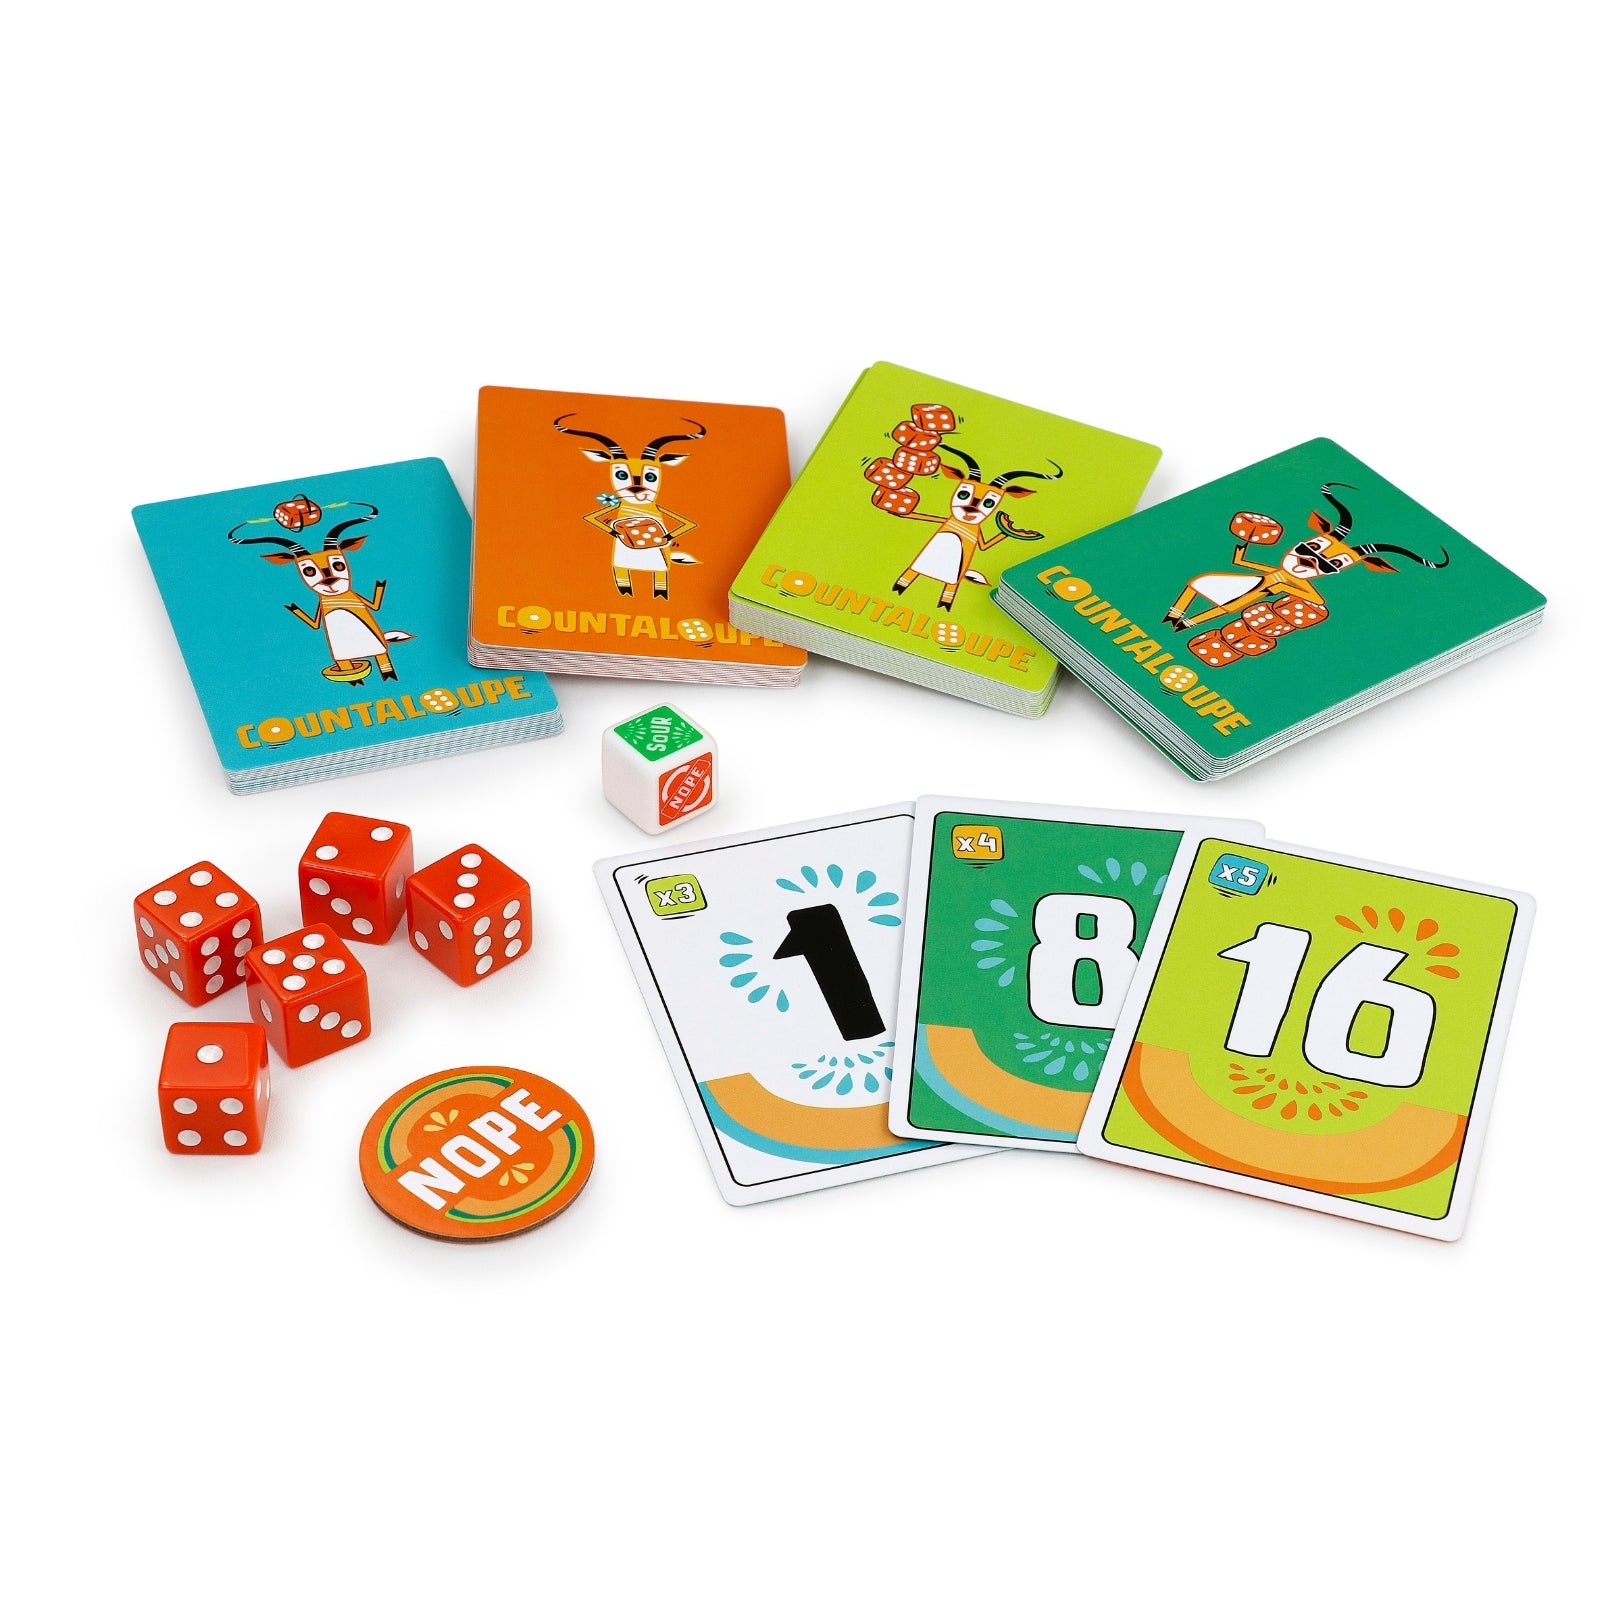 Countaloupe cards and dice